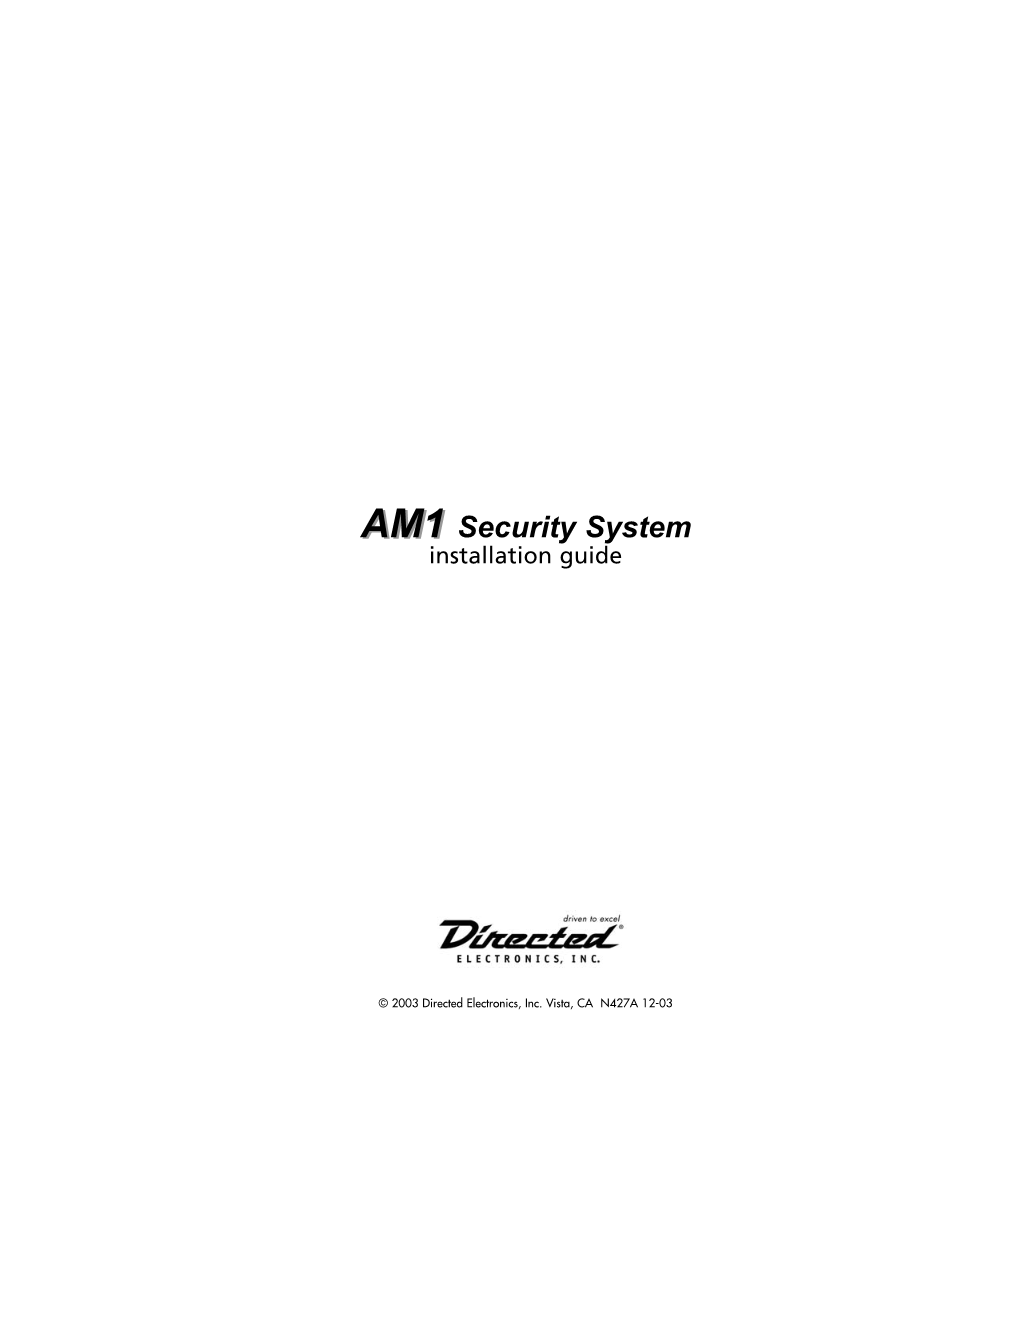 AM1 Security System Installation Guide